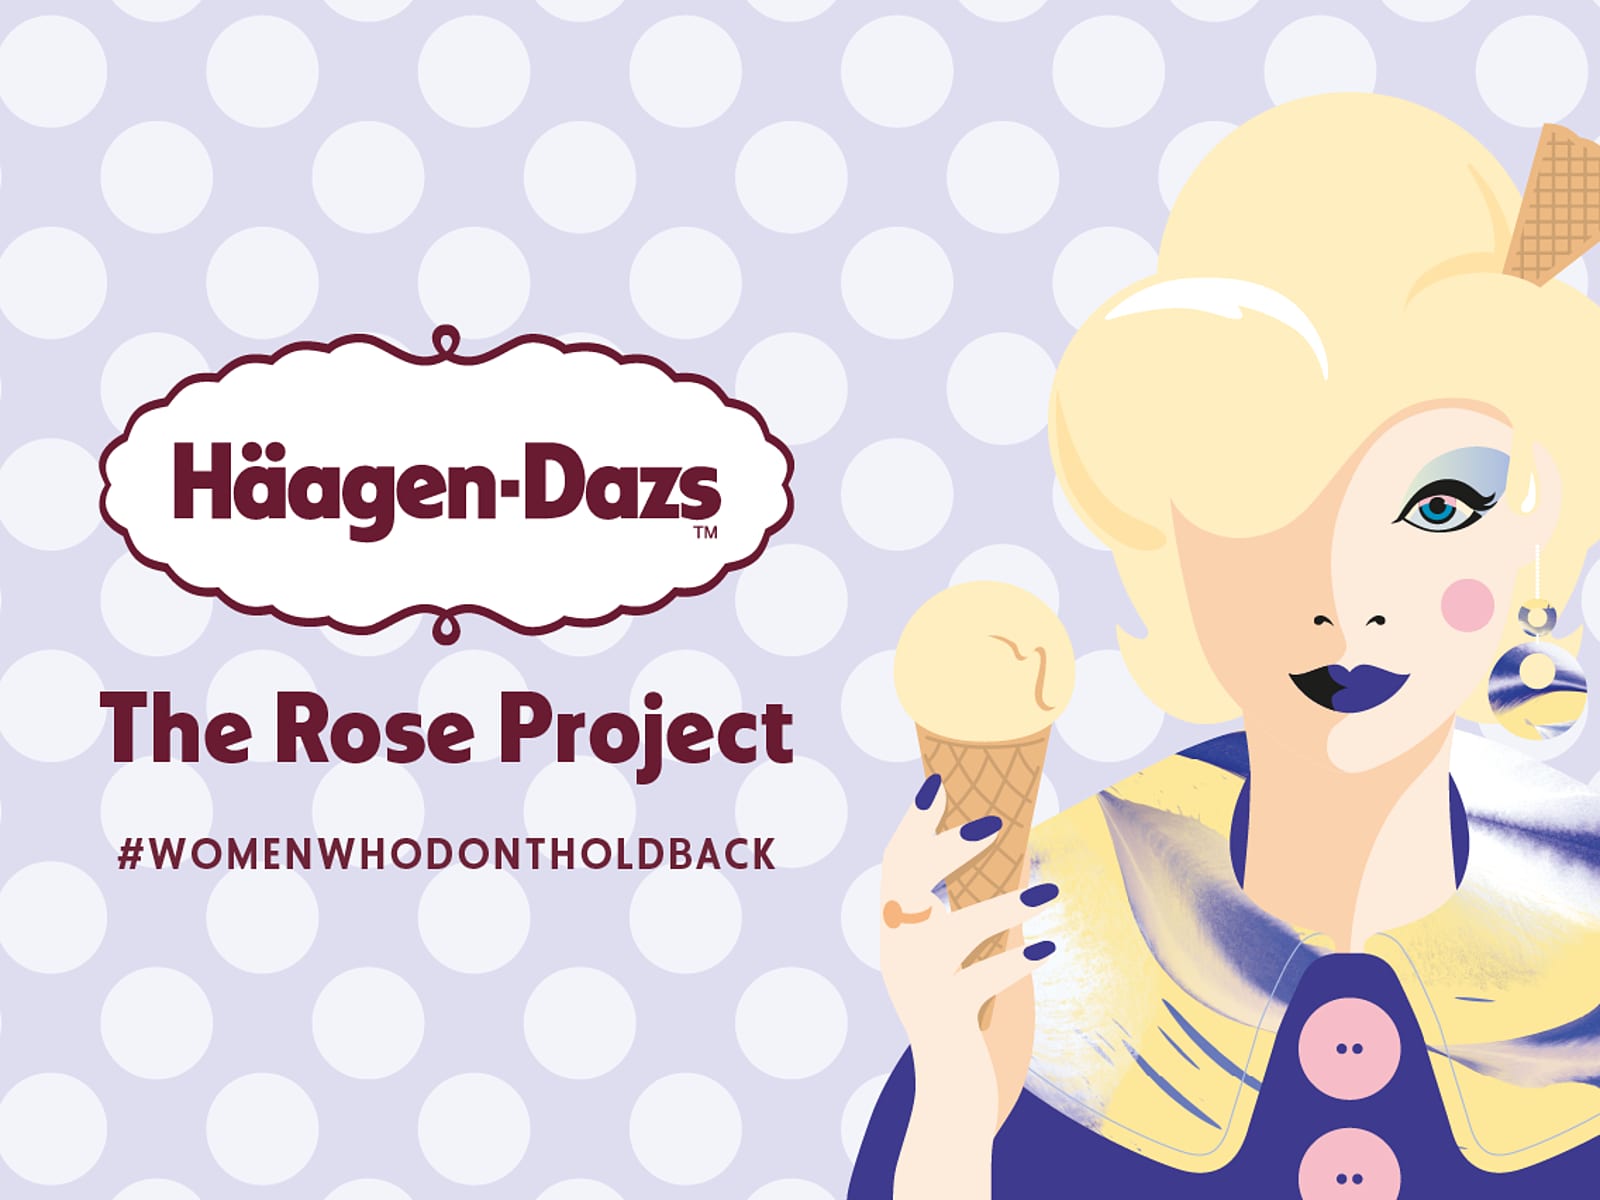 Häagen-Dazs The Rose Project logo featuring illustration of Rose Mattus, co-founder of the iconic brand.